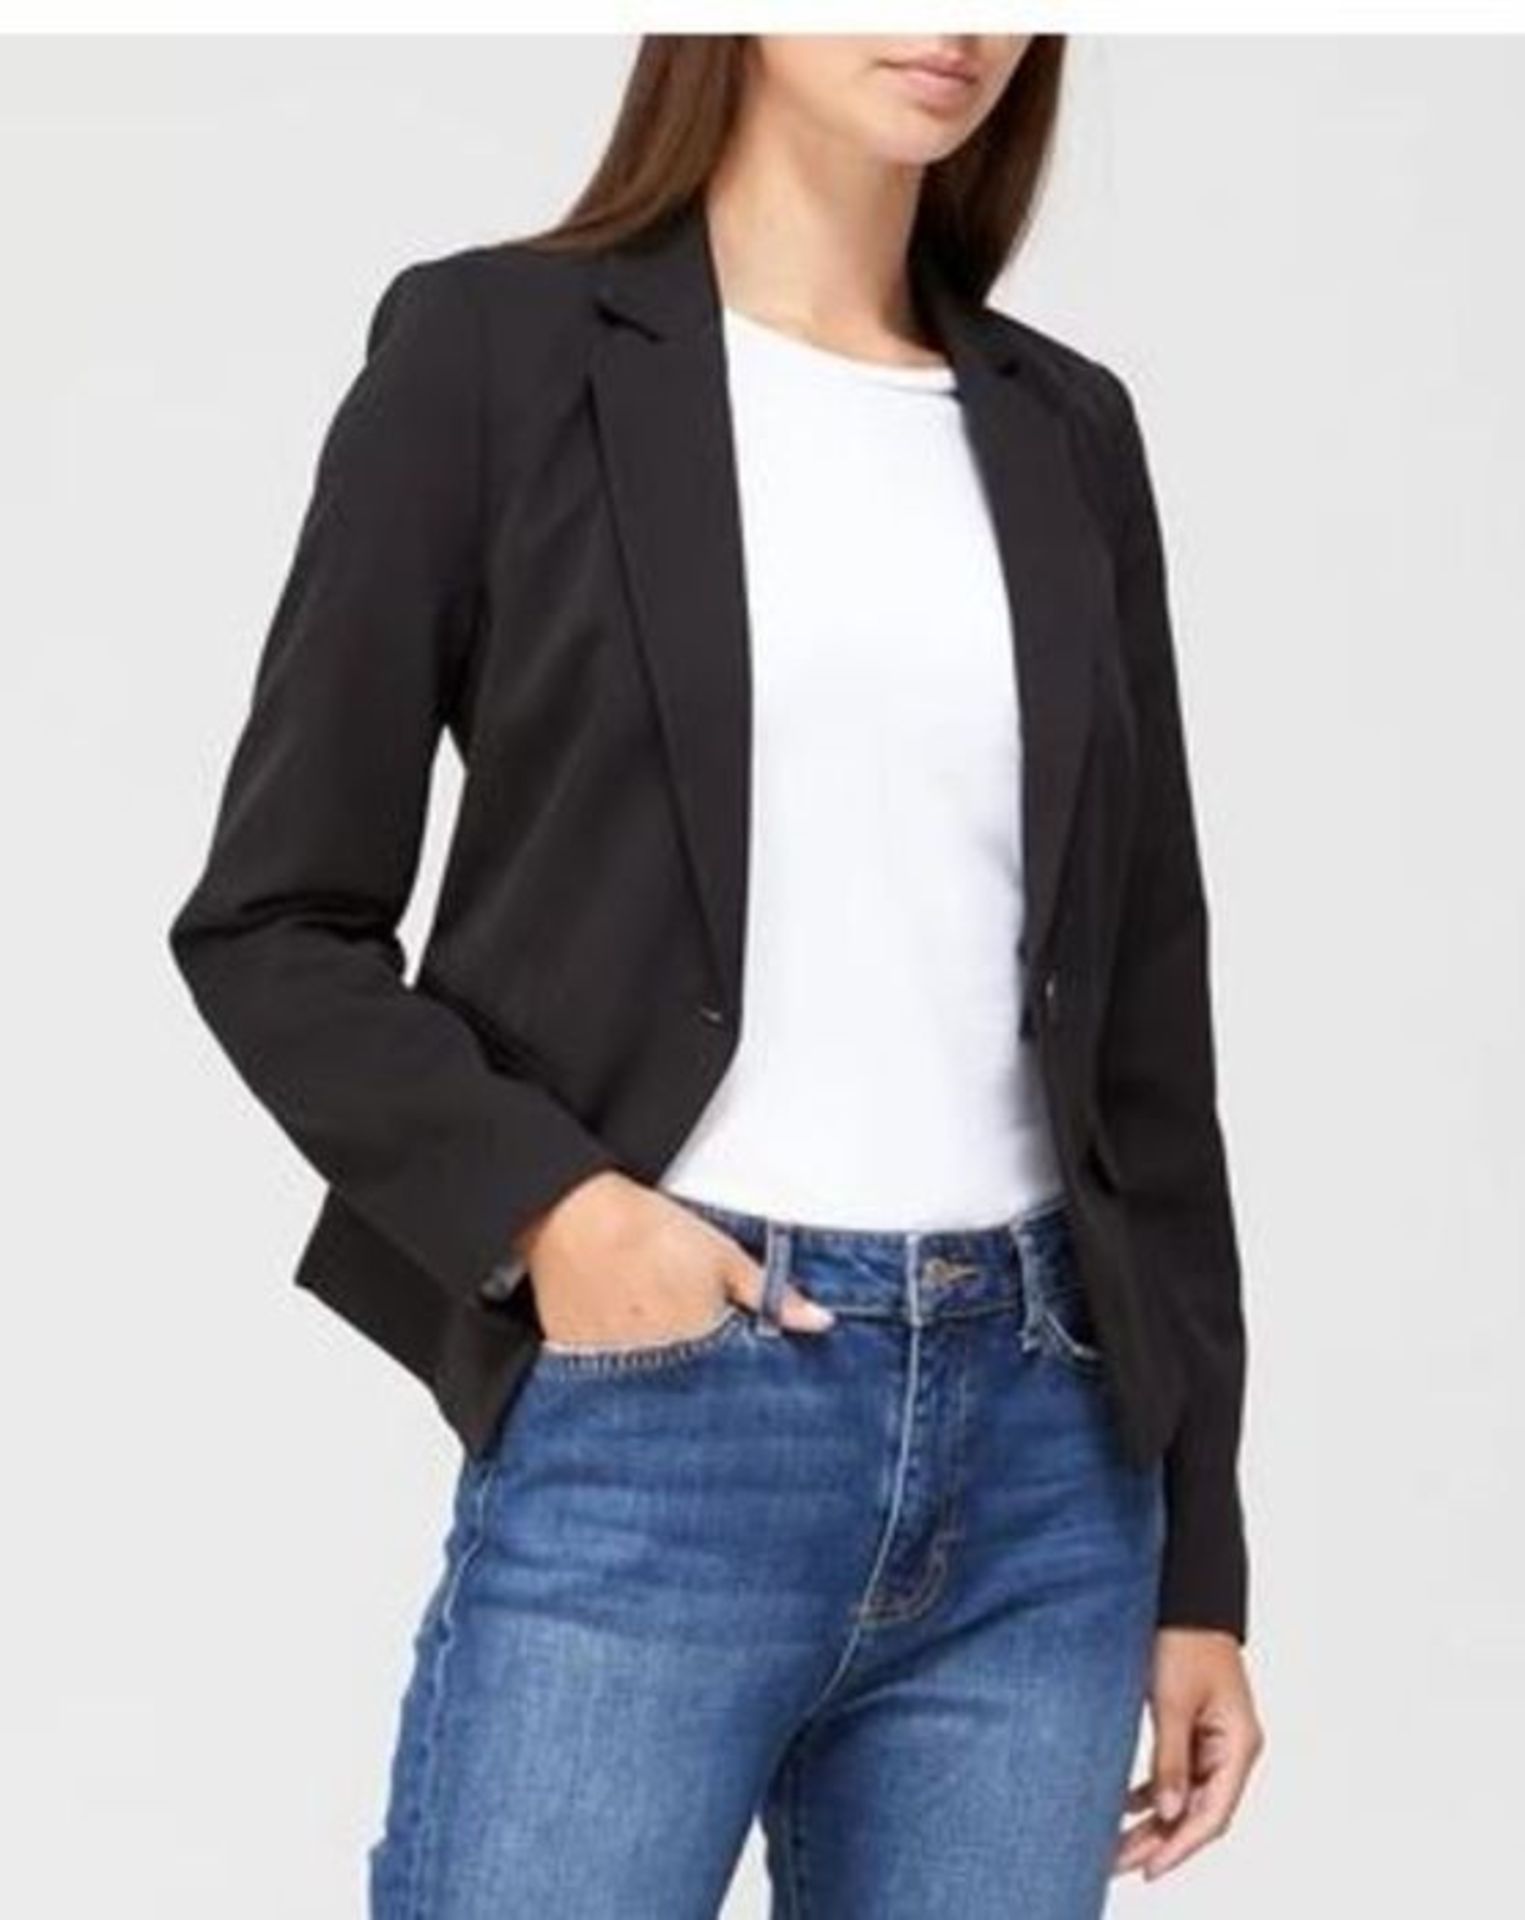 6 X V BY VERY SHORT CORE BLAZER - BLACK / UK SIZE 14 / COMBINED RRP £168.00 / BRAND NEW WITH TAGS